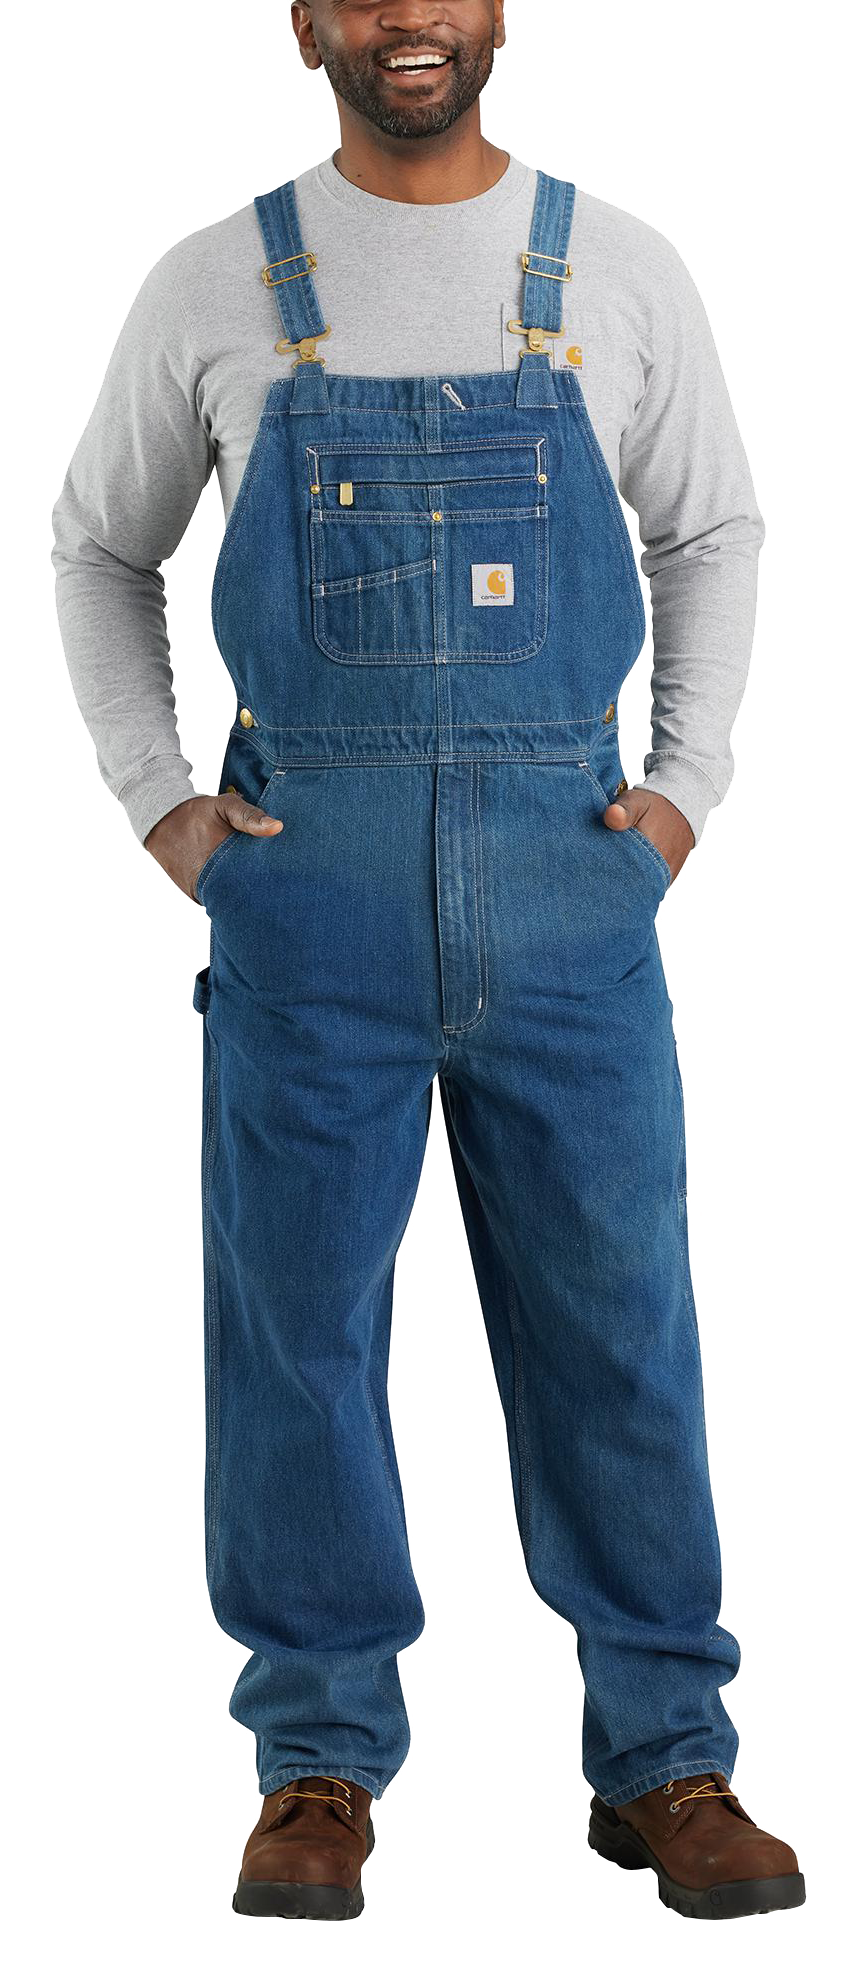 Carhartt Super Dux Relaxed Fit Insulated Bib Overalls for Men